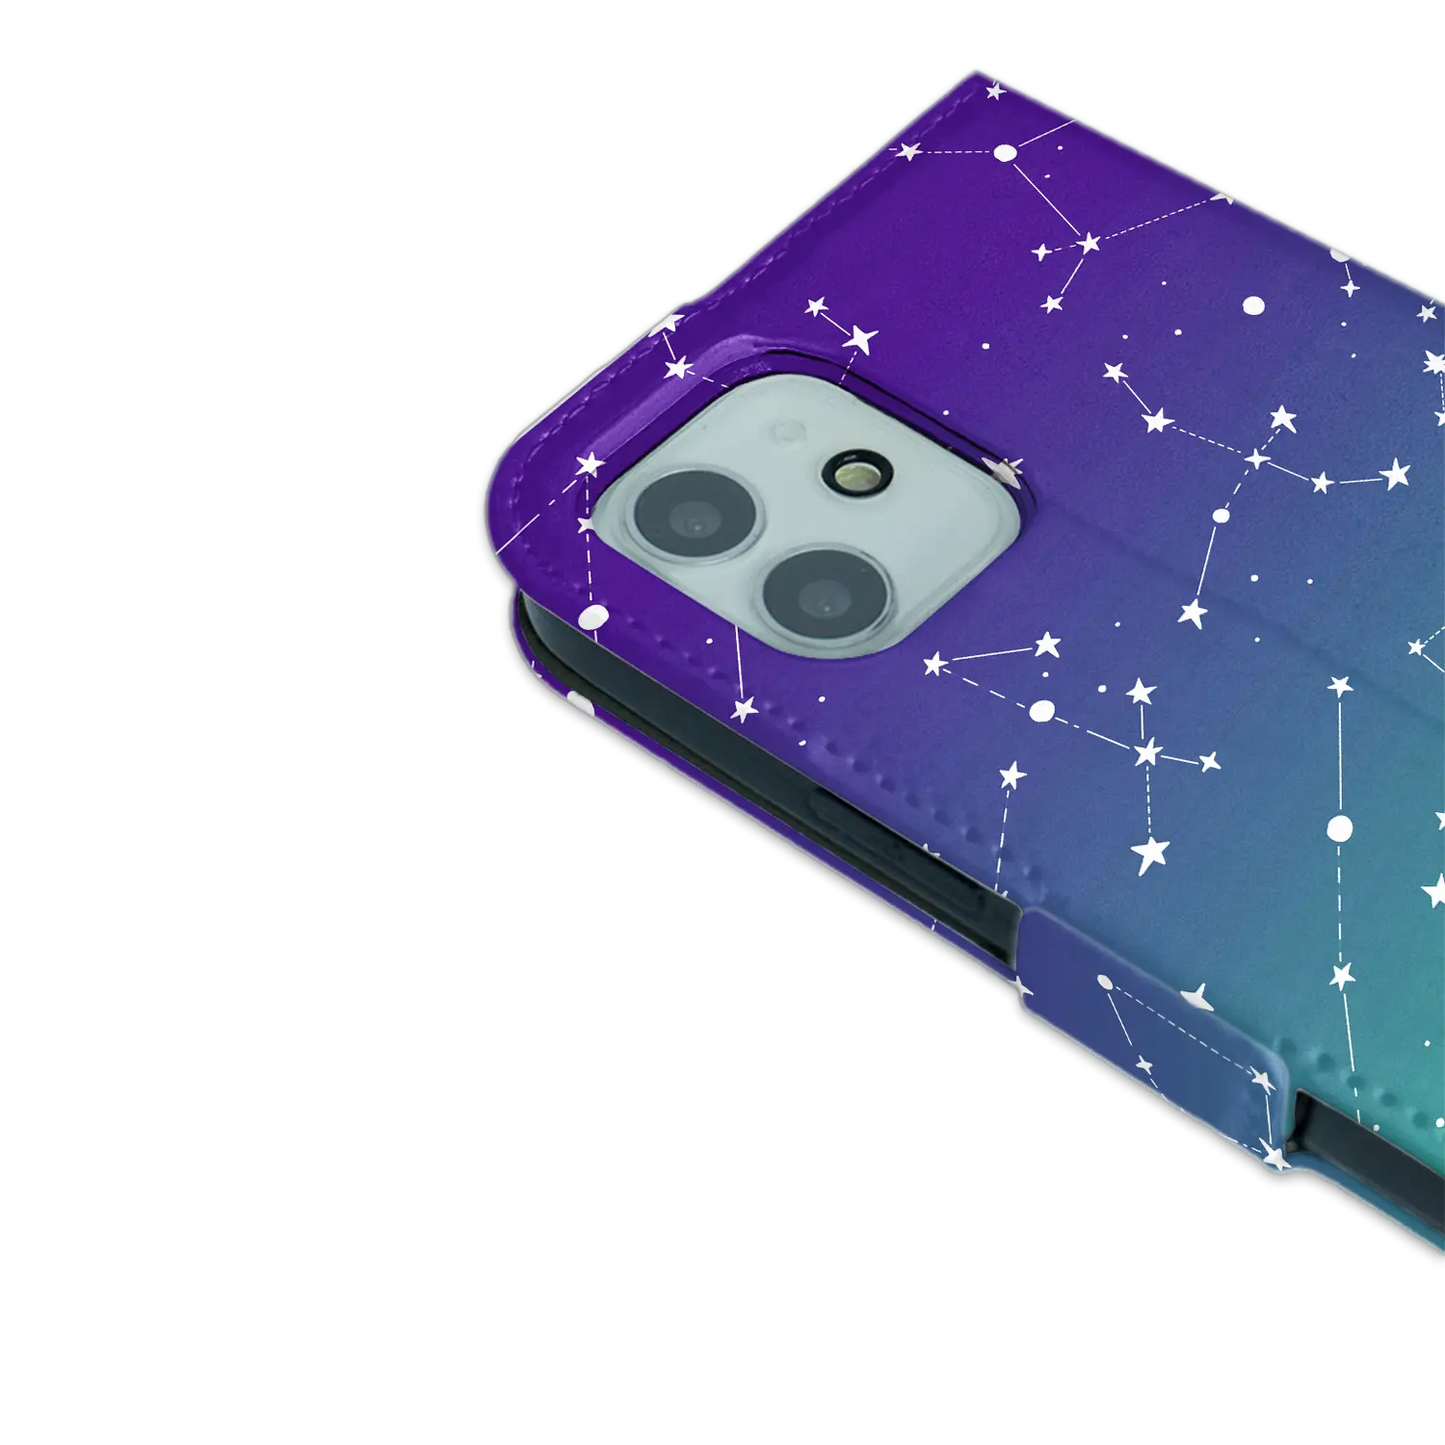 Let’s Face It - Constellations - Personalised Galaxy S Case